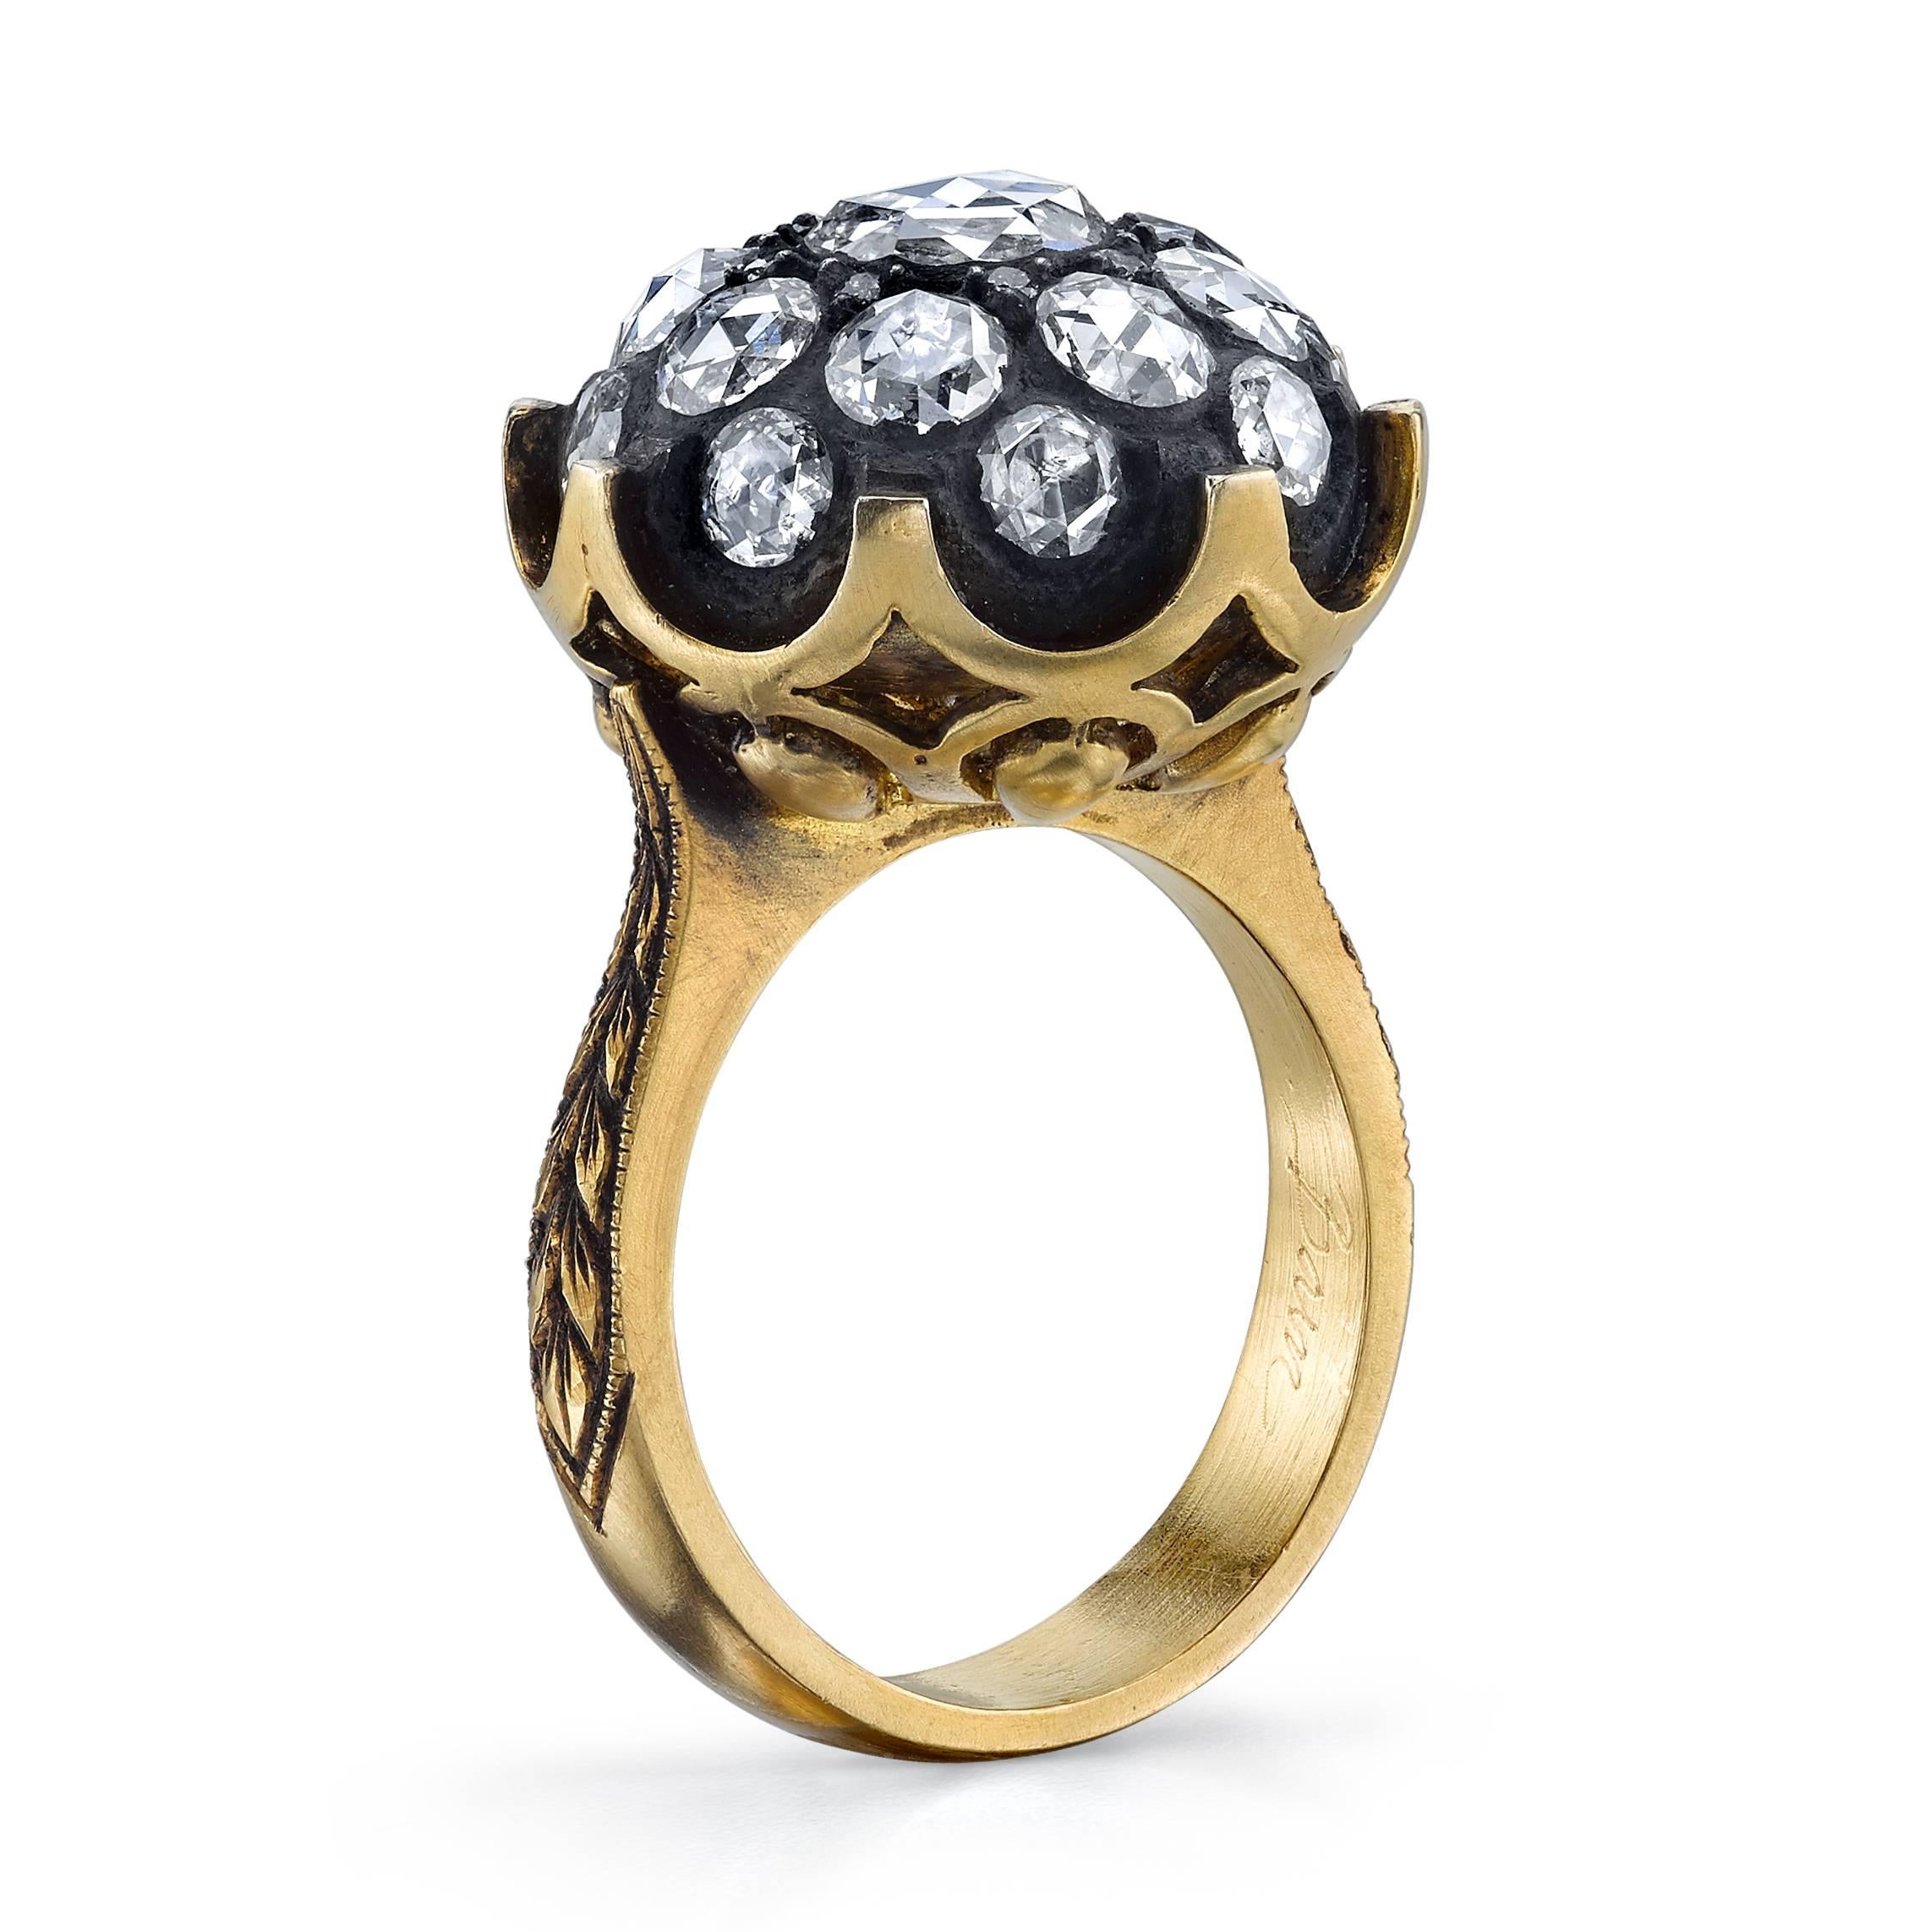 18 Karat Yellow Gold and 2.27 CT Rose Cut Diamond Ring, accented with Silver Patina and 0.68 CT Round Brilliant Diamonds. 

Inspired by the Edwardian Era, a time when fine jewelry was a crucial component of every outfit, pieces were created to